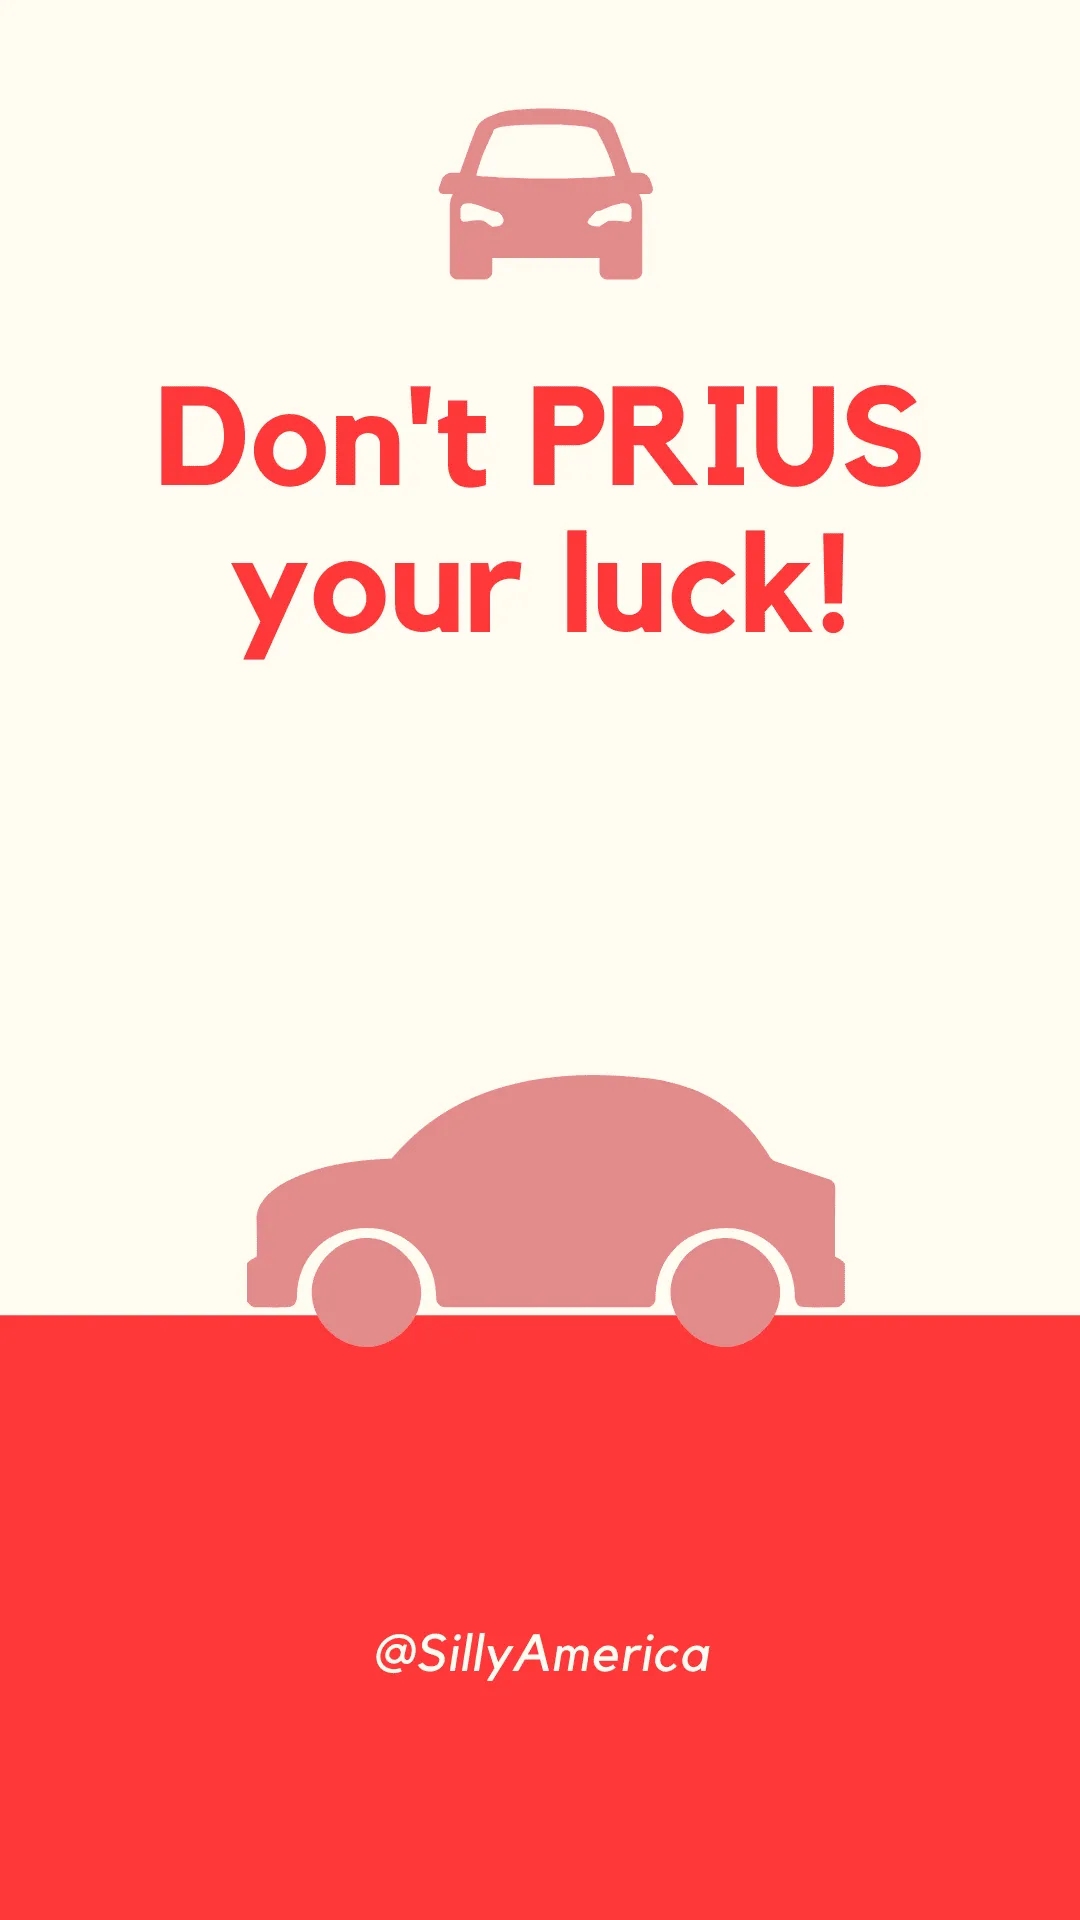 Don't PRIUS your luck! - Car Puns to fuel your road trip content!